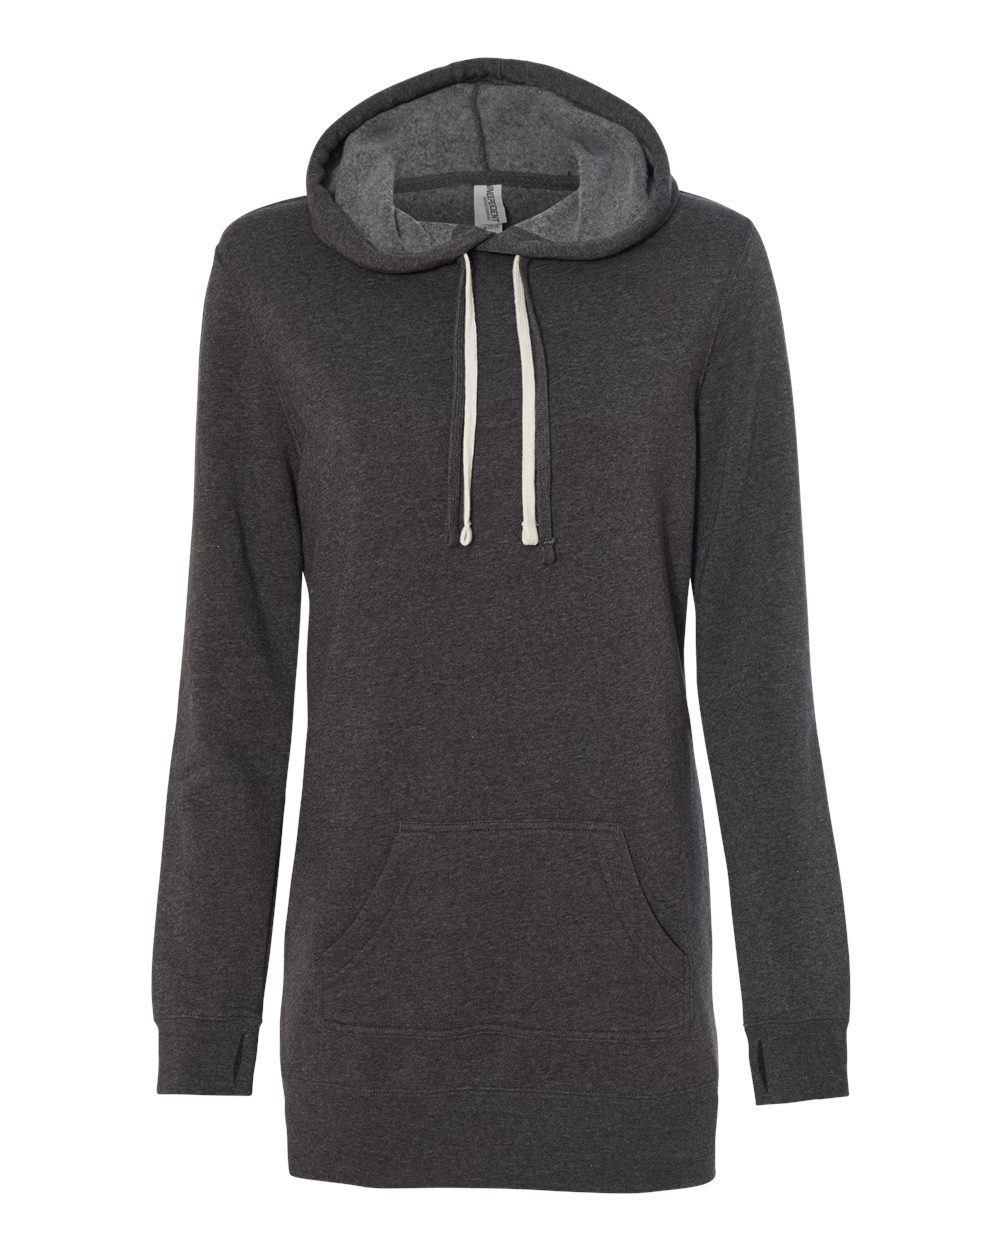 Independent Trading Co. PRM65DRS | Women’s Special Blend Hooded ...